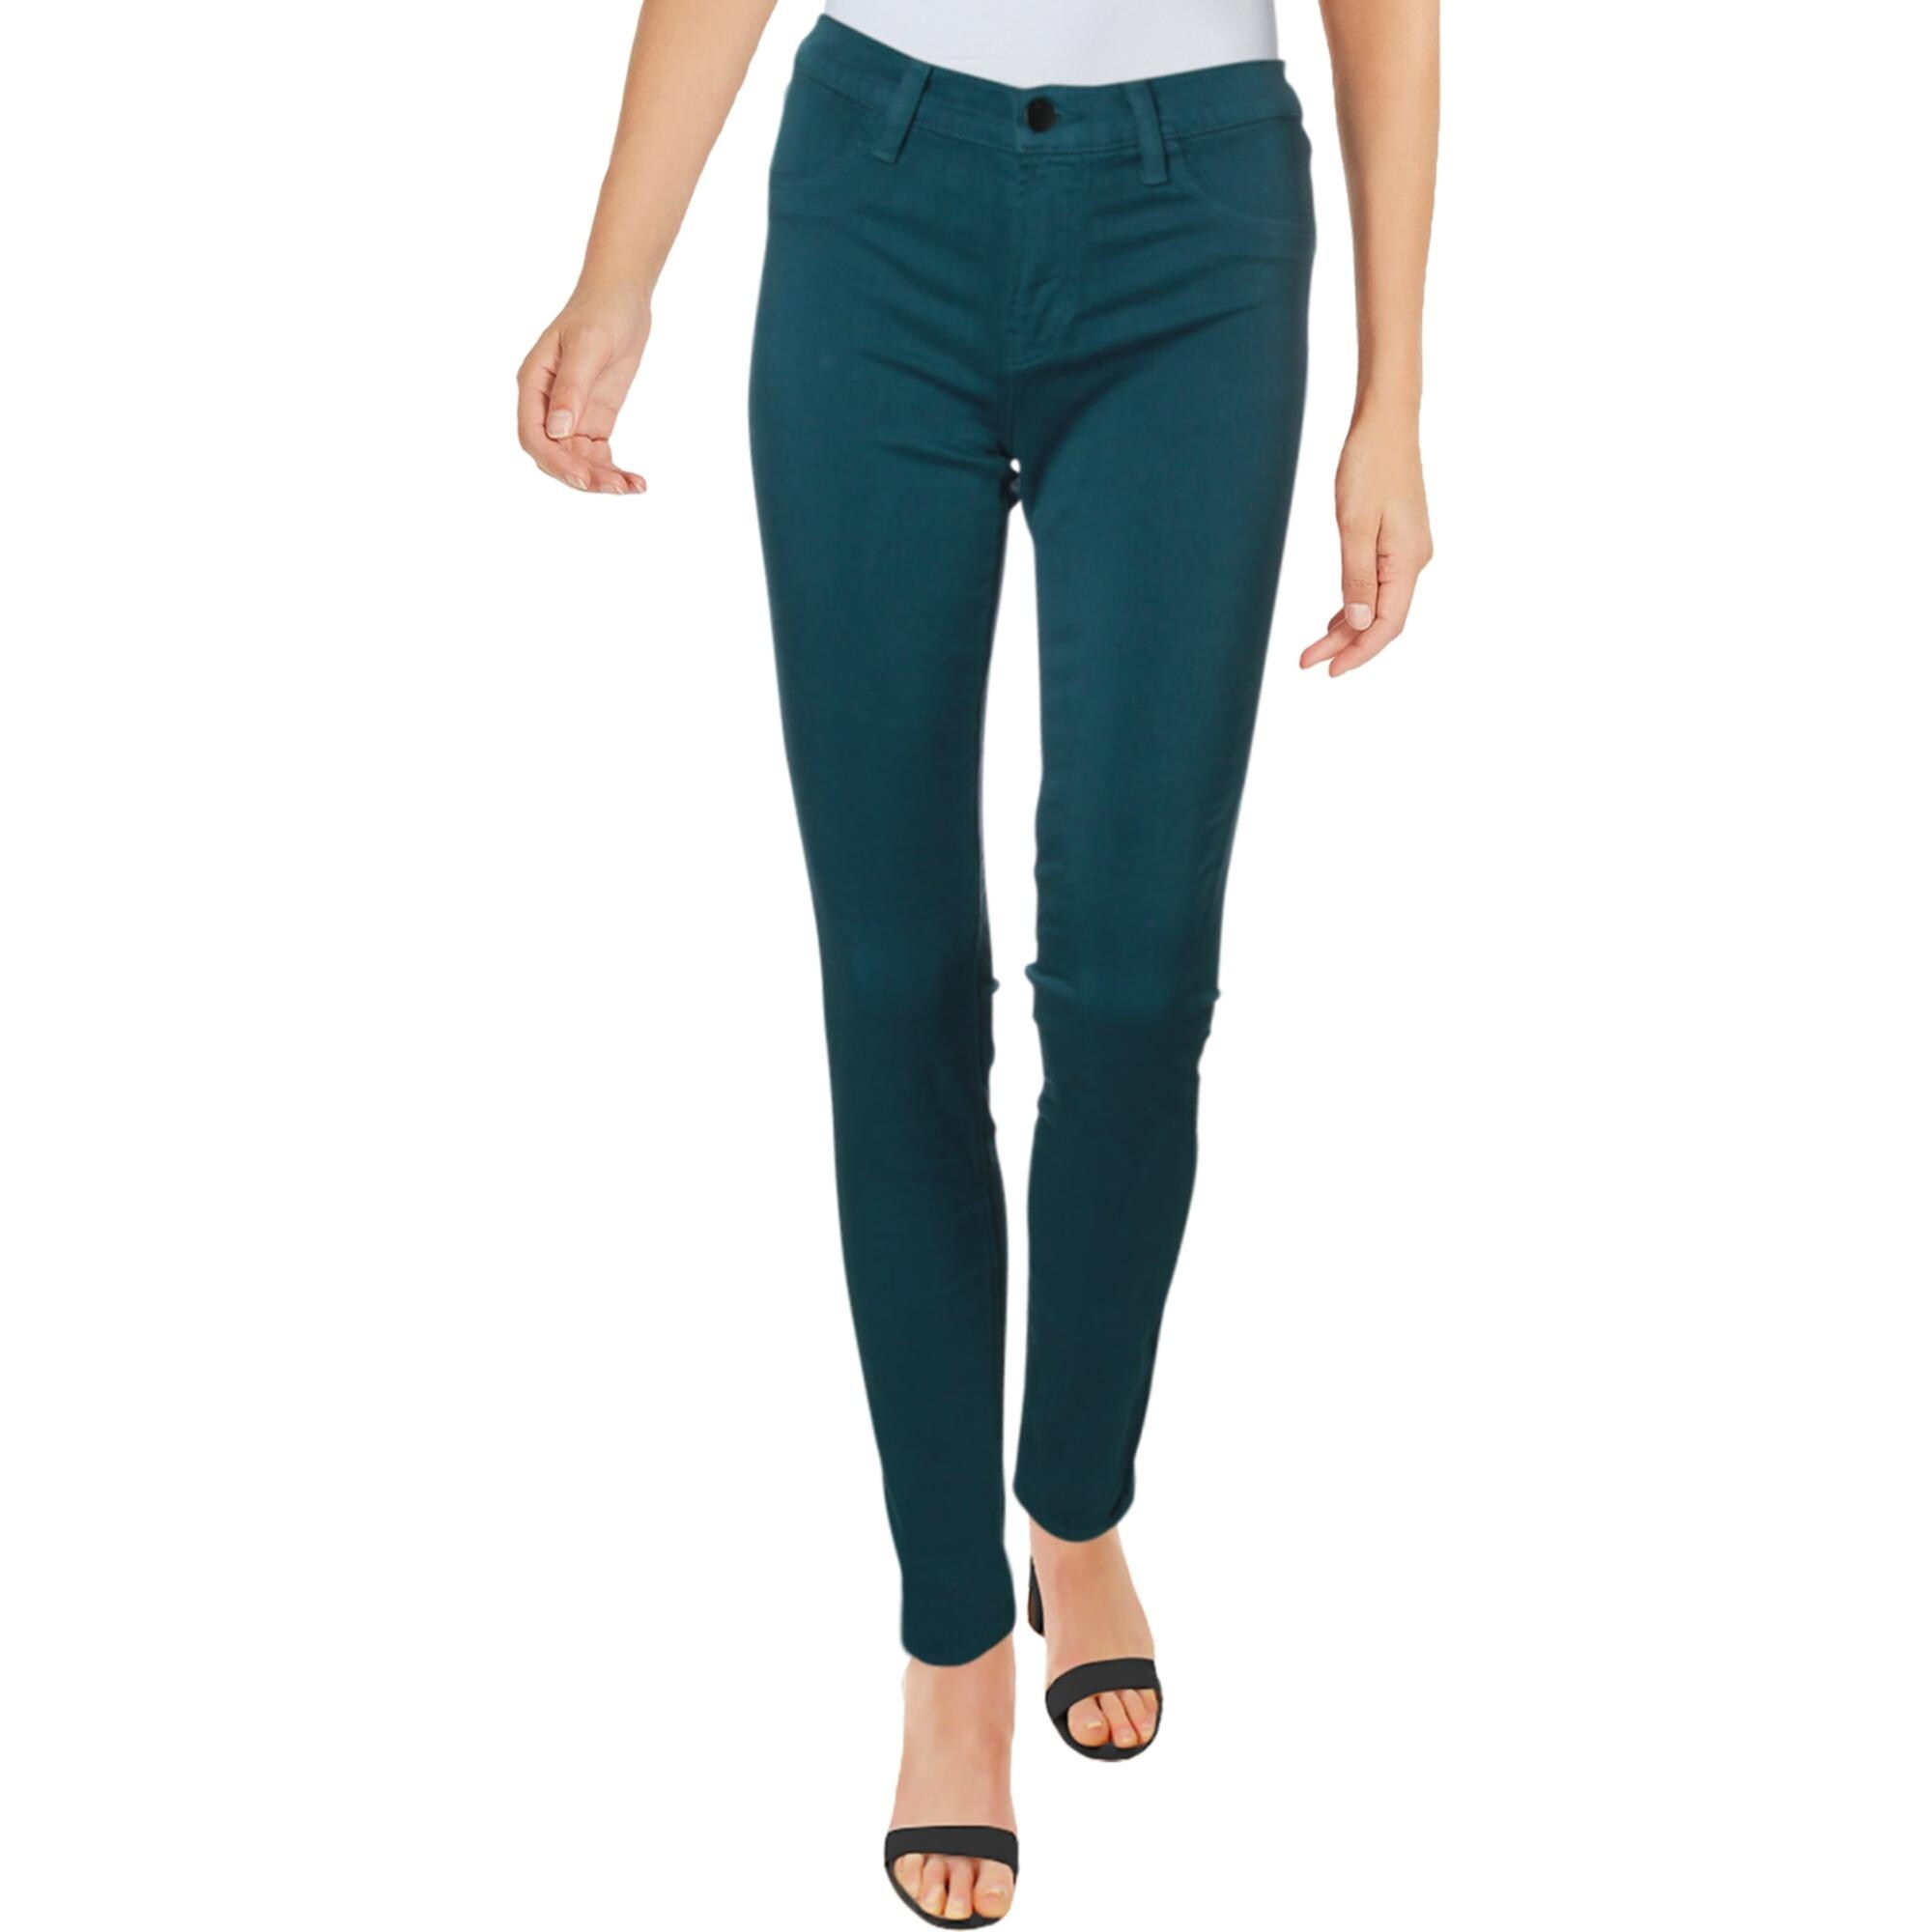 j brand colored jeans